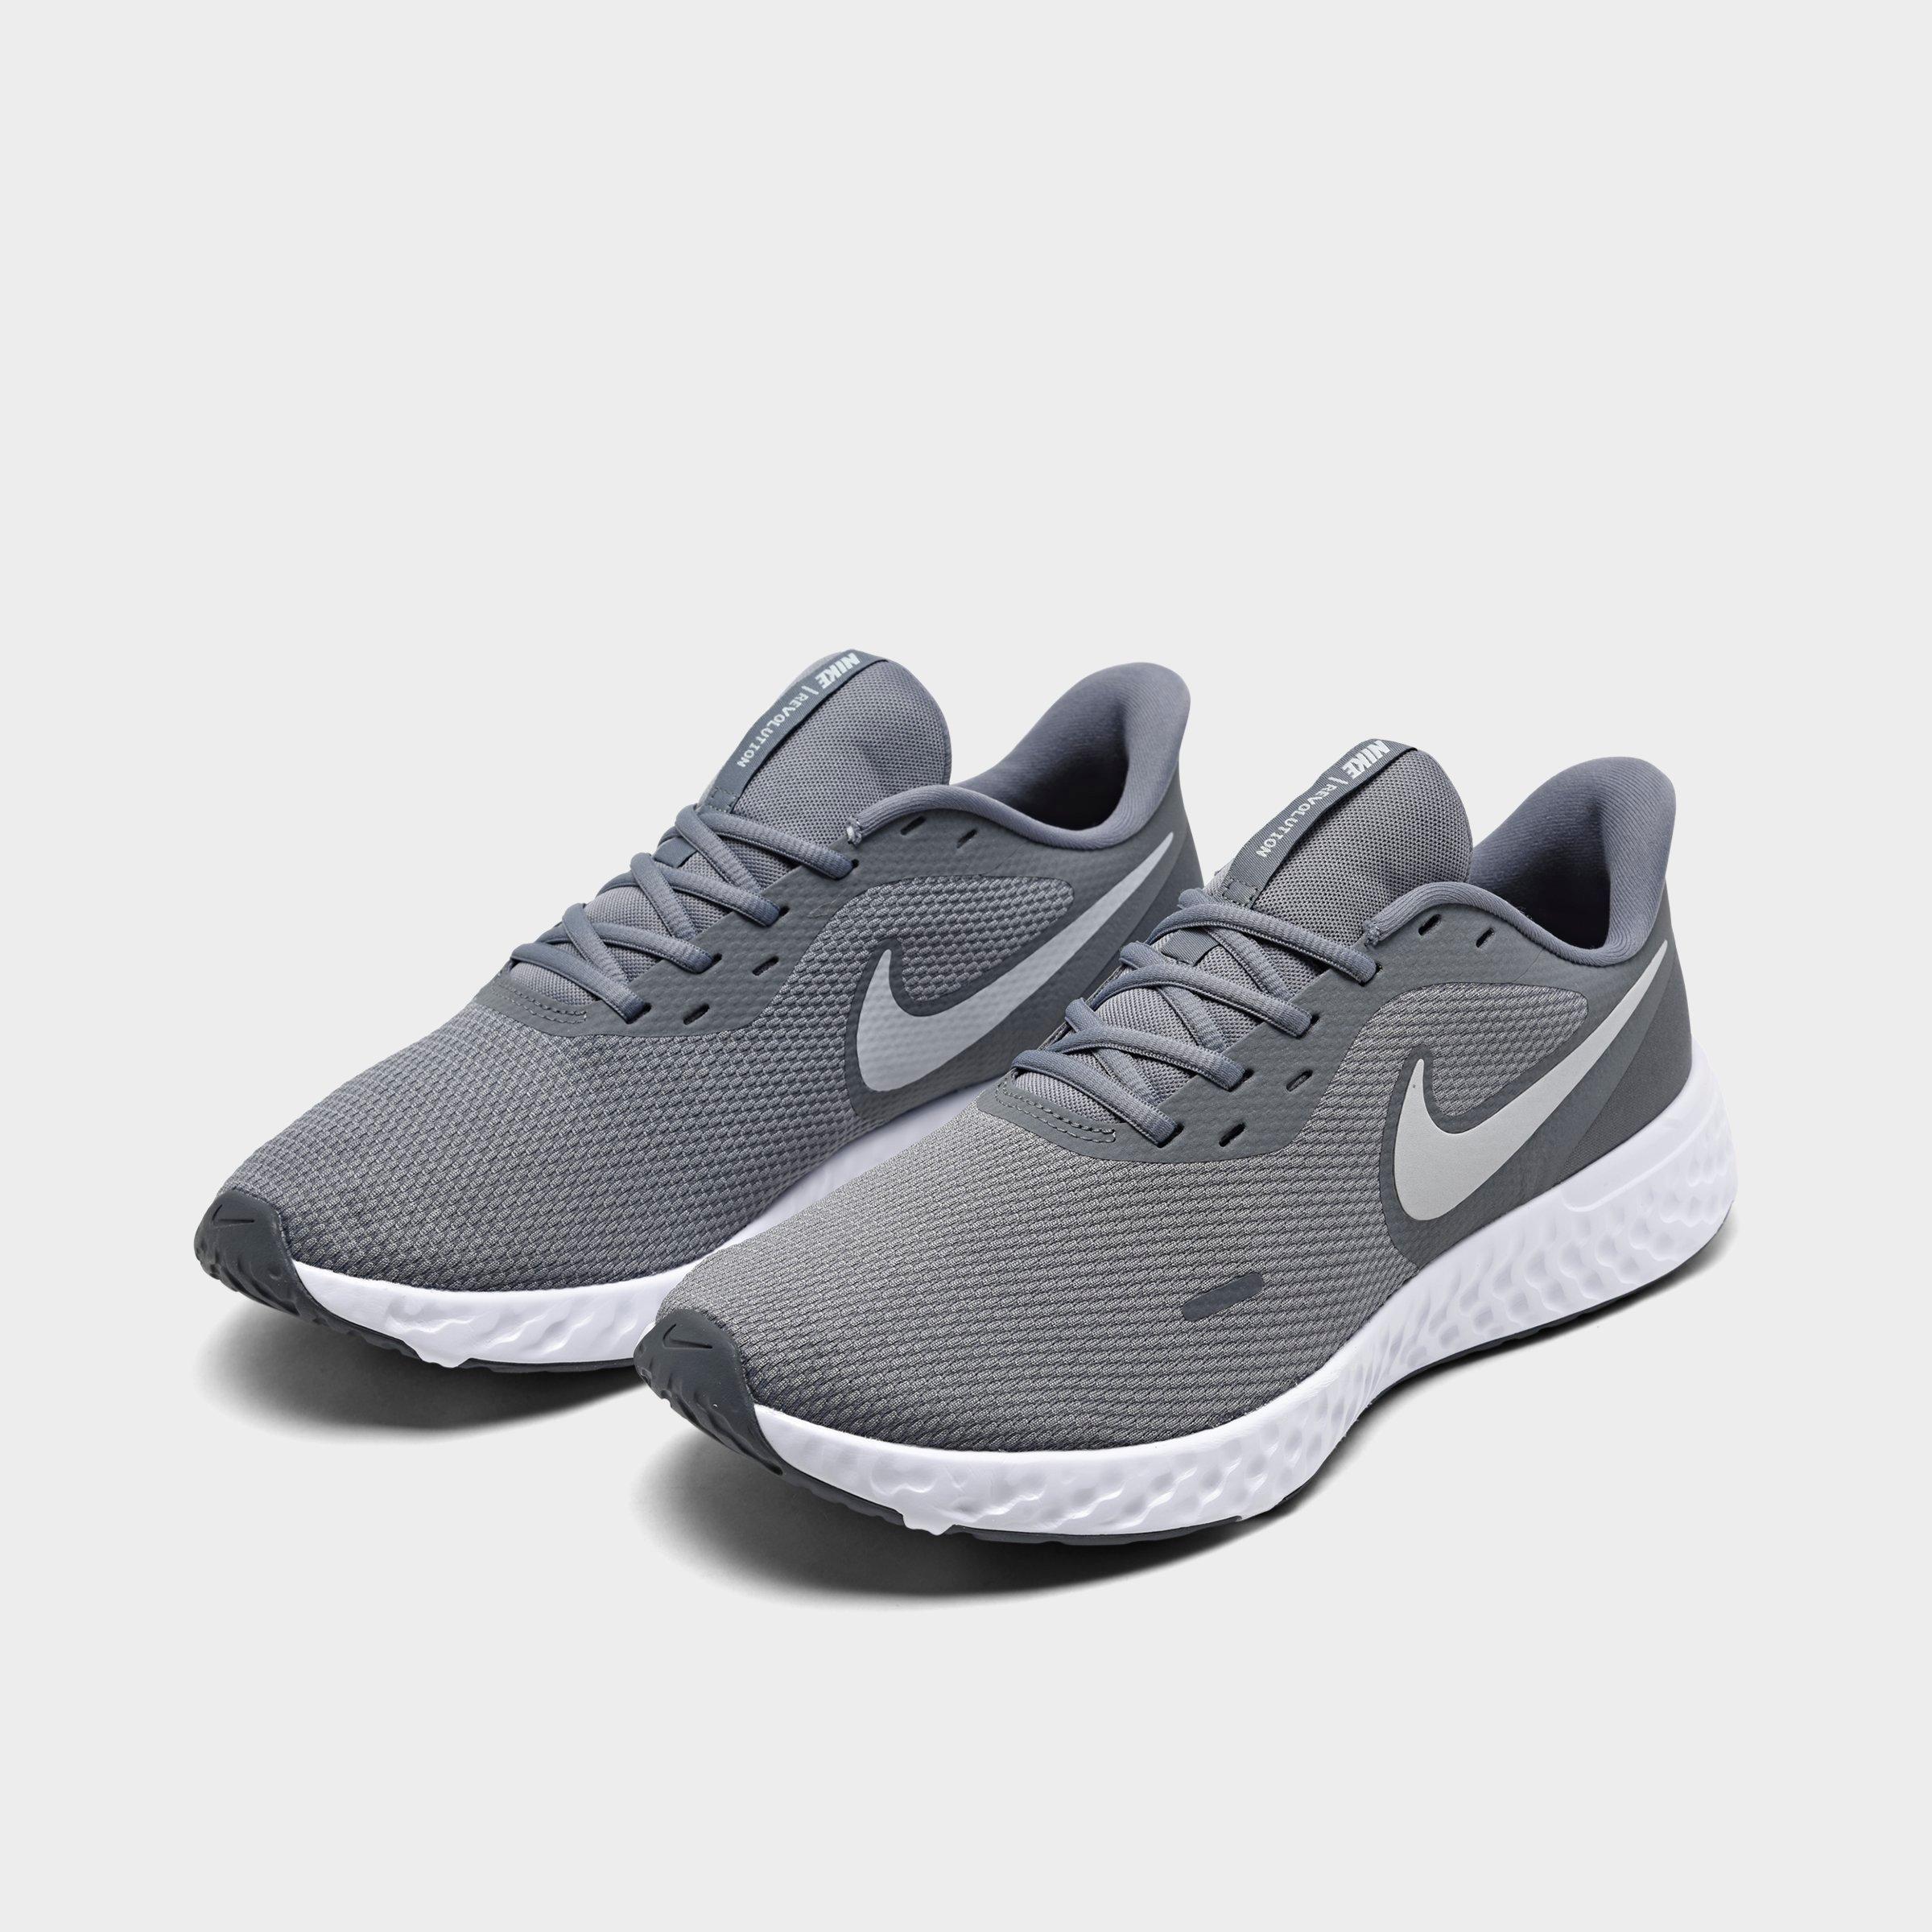 nike wide width running shoes